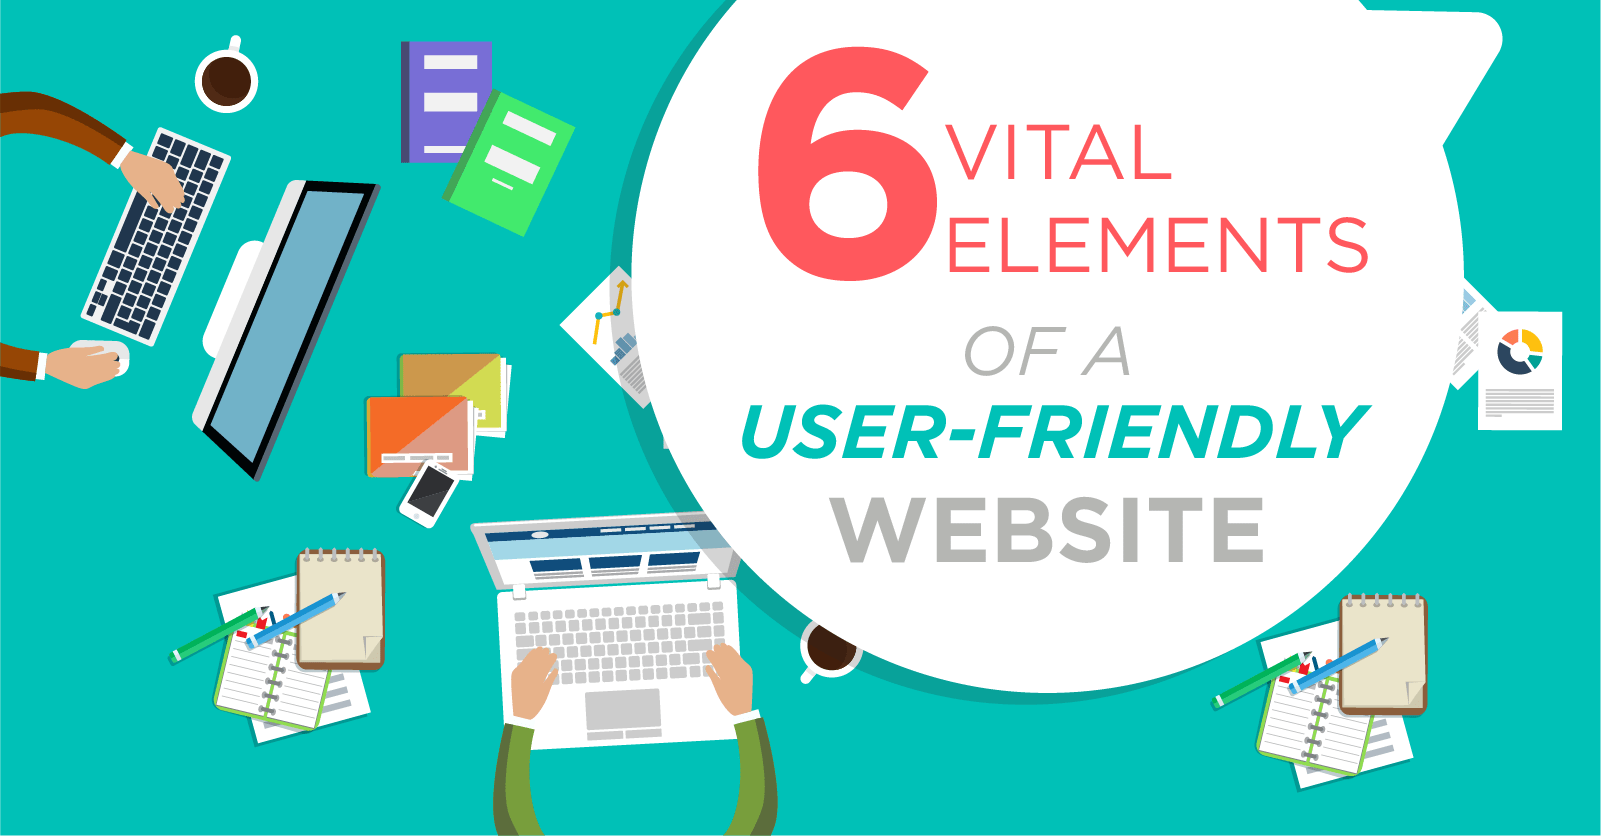 vital elements of a user-friendly website